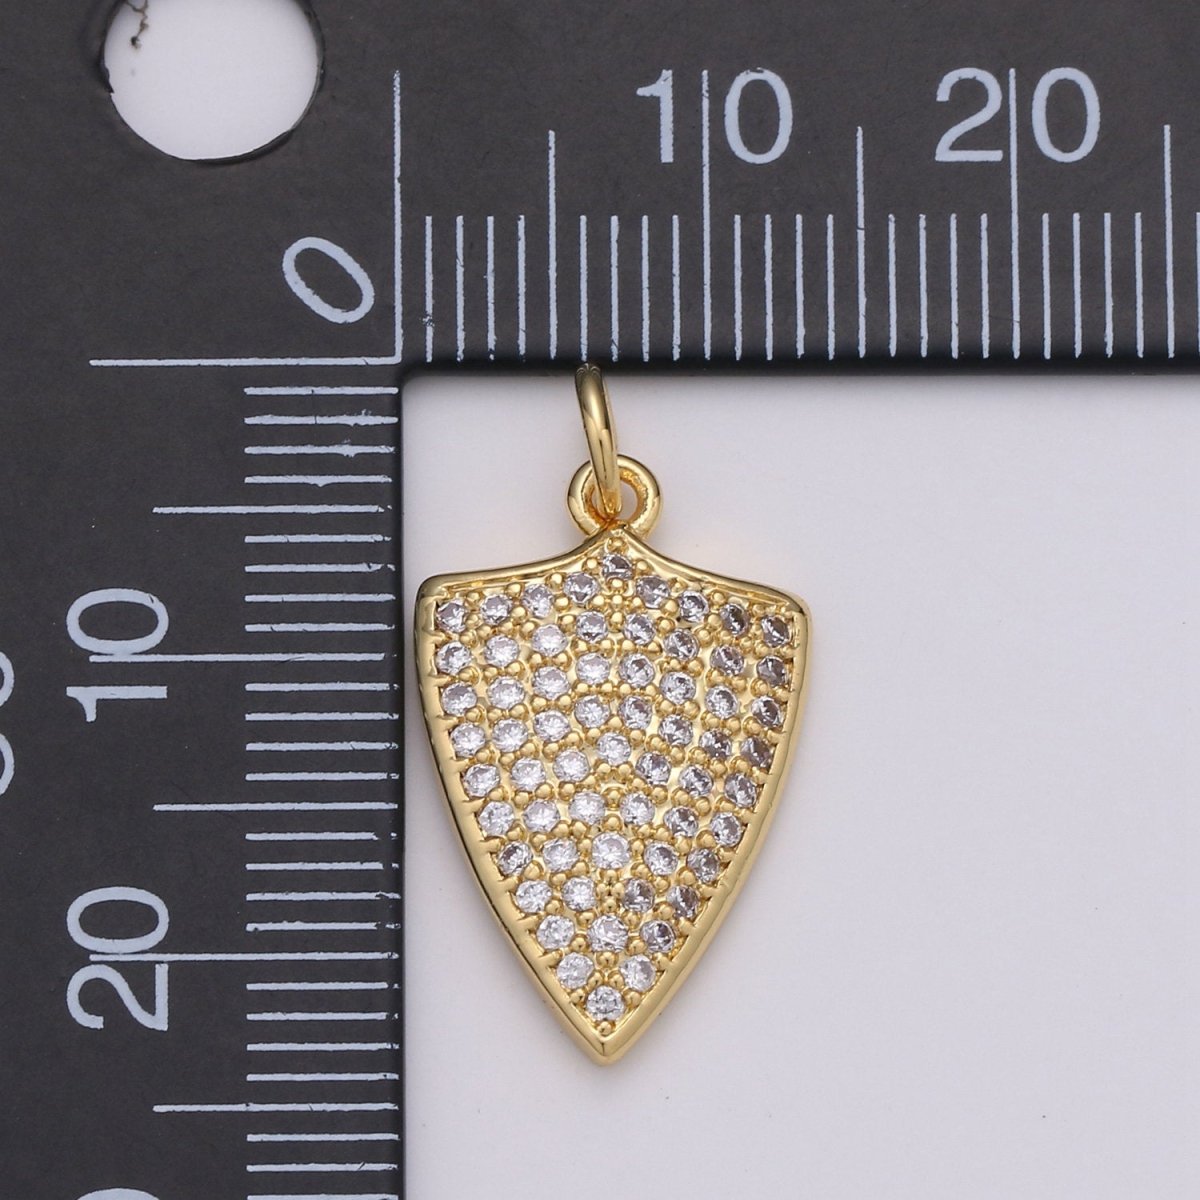 Micro Pave 14k Gold filled Dainty Shield Charm Medieval Knight Medallion Pendant for Necklace Earring Bracelet Charm D-417 D-418 - DLUXCA